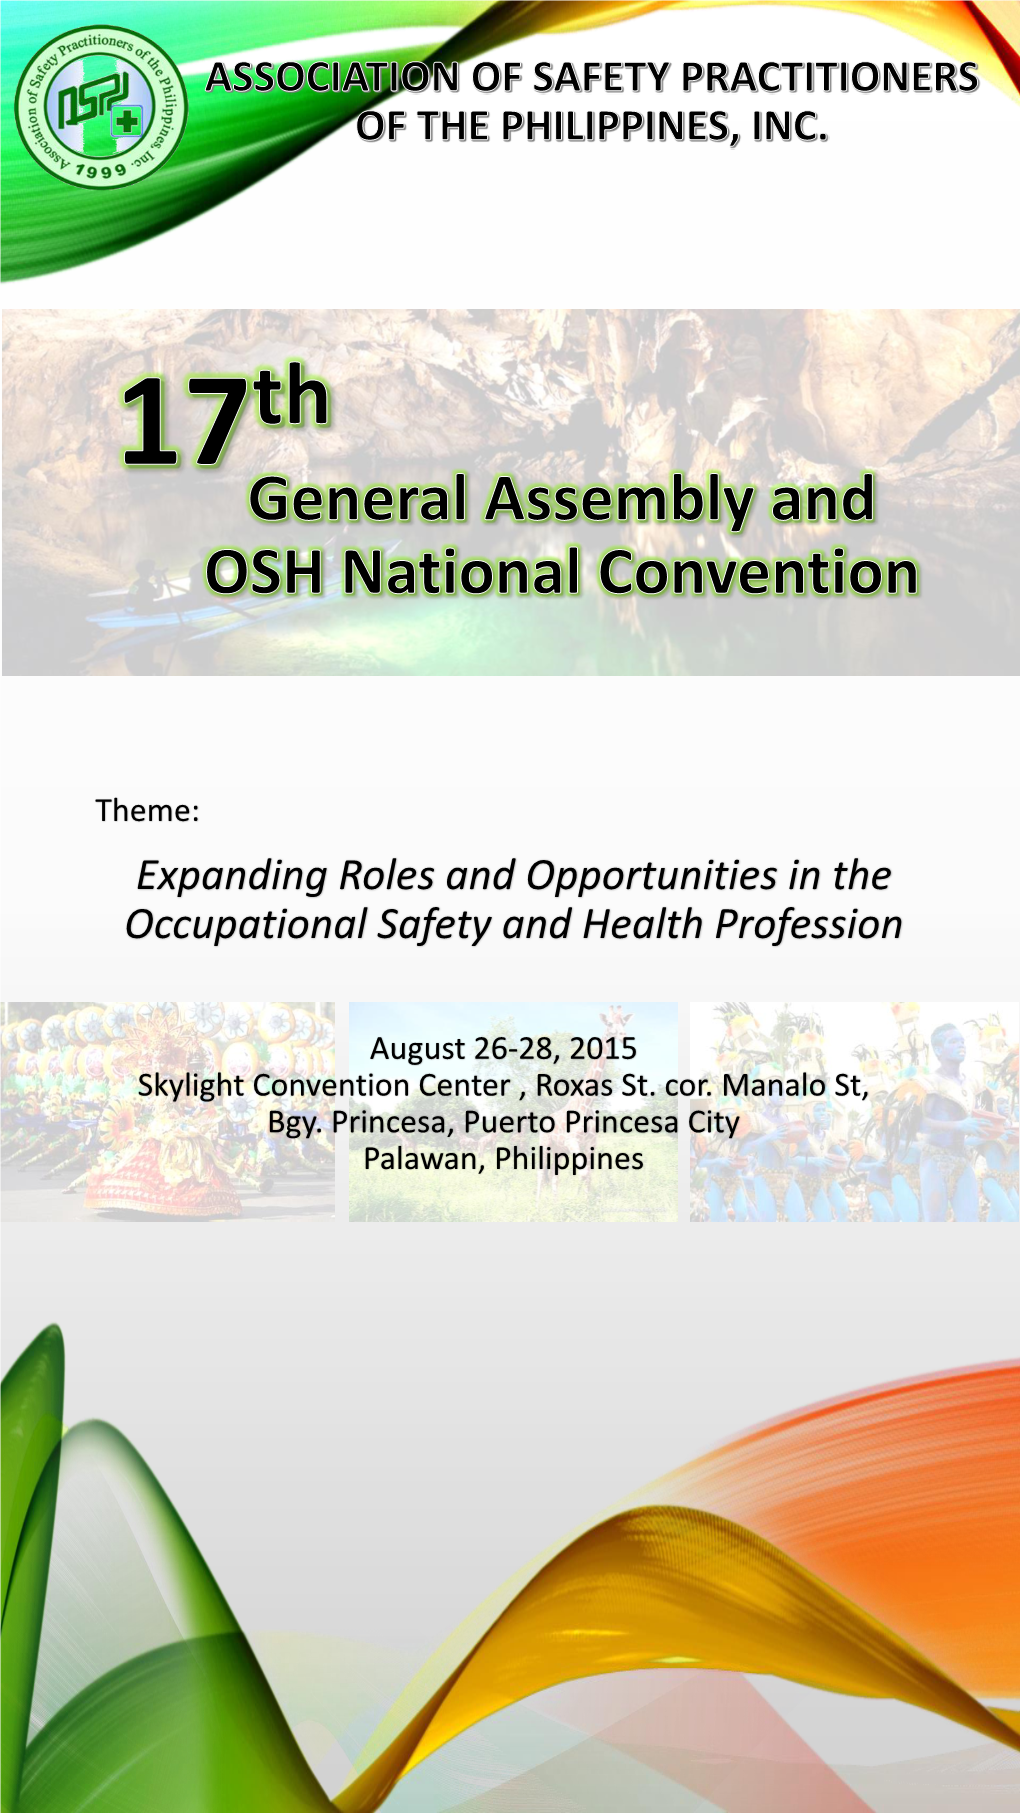 Association of Safety Practitioners of the Philippines, Inc. |